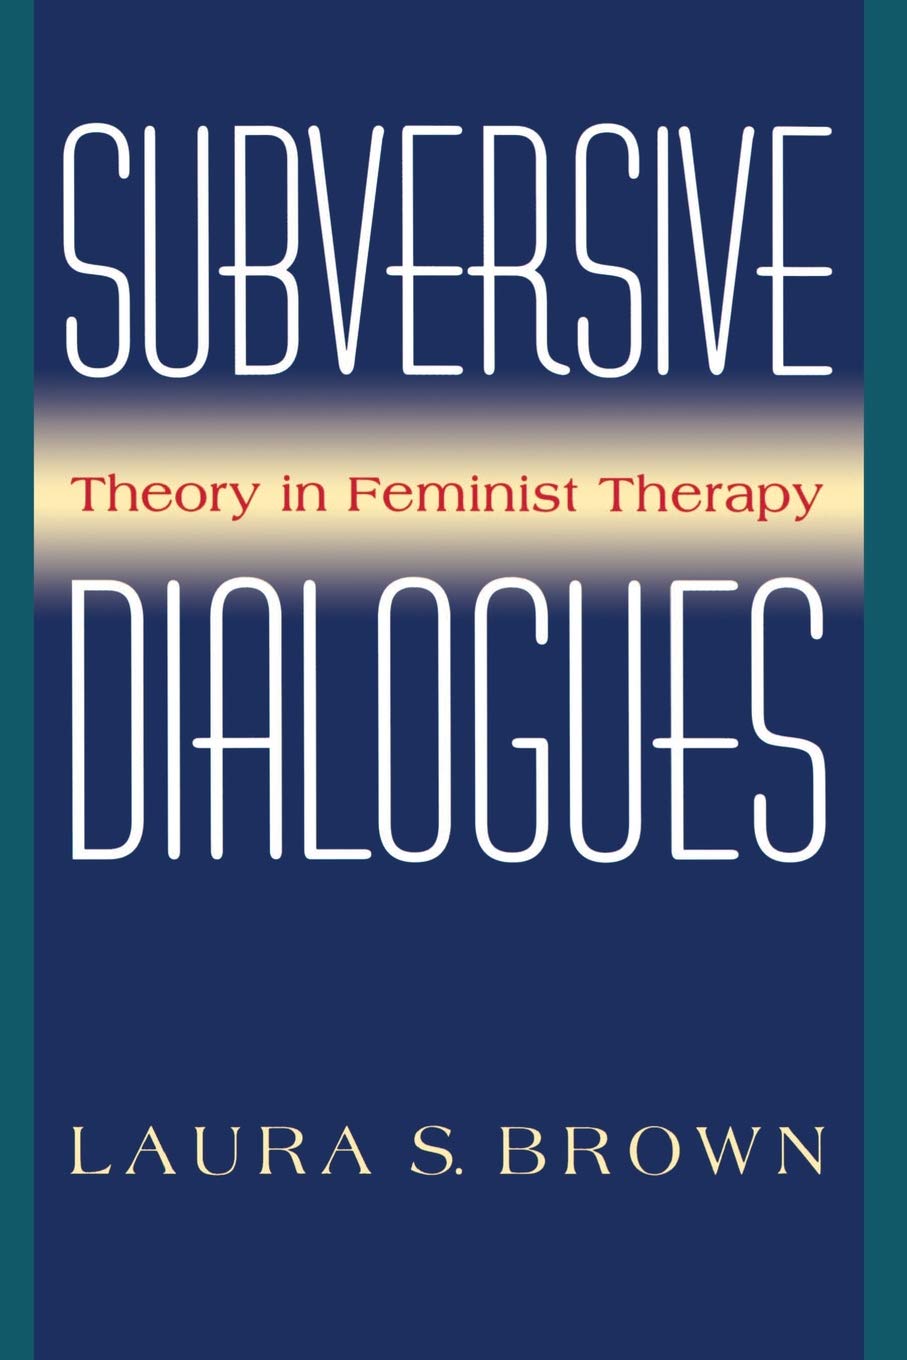 Subversive Dialogues: Theory In Feminist Therapy